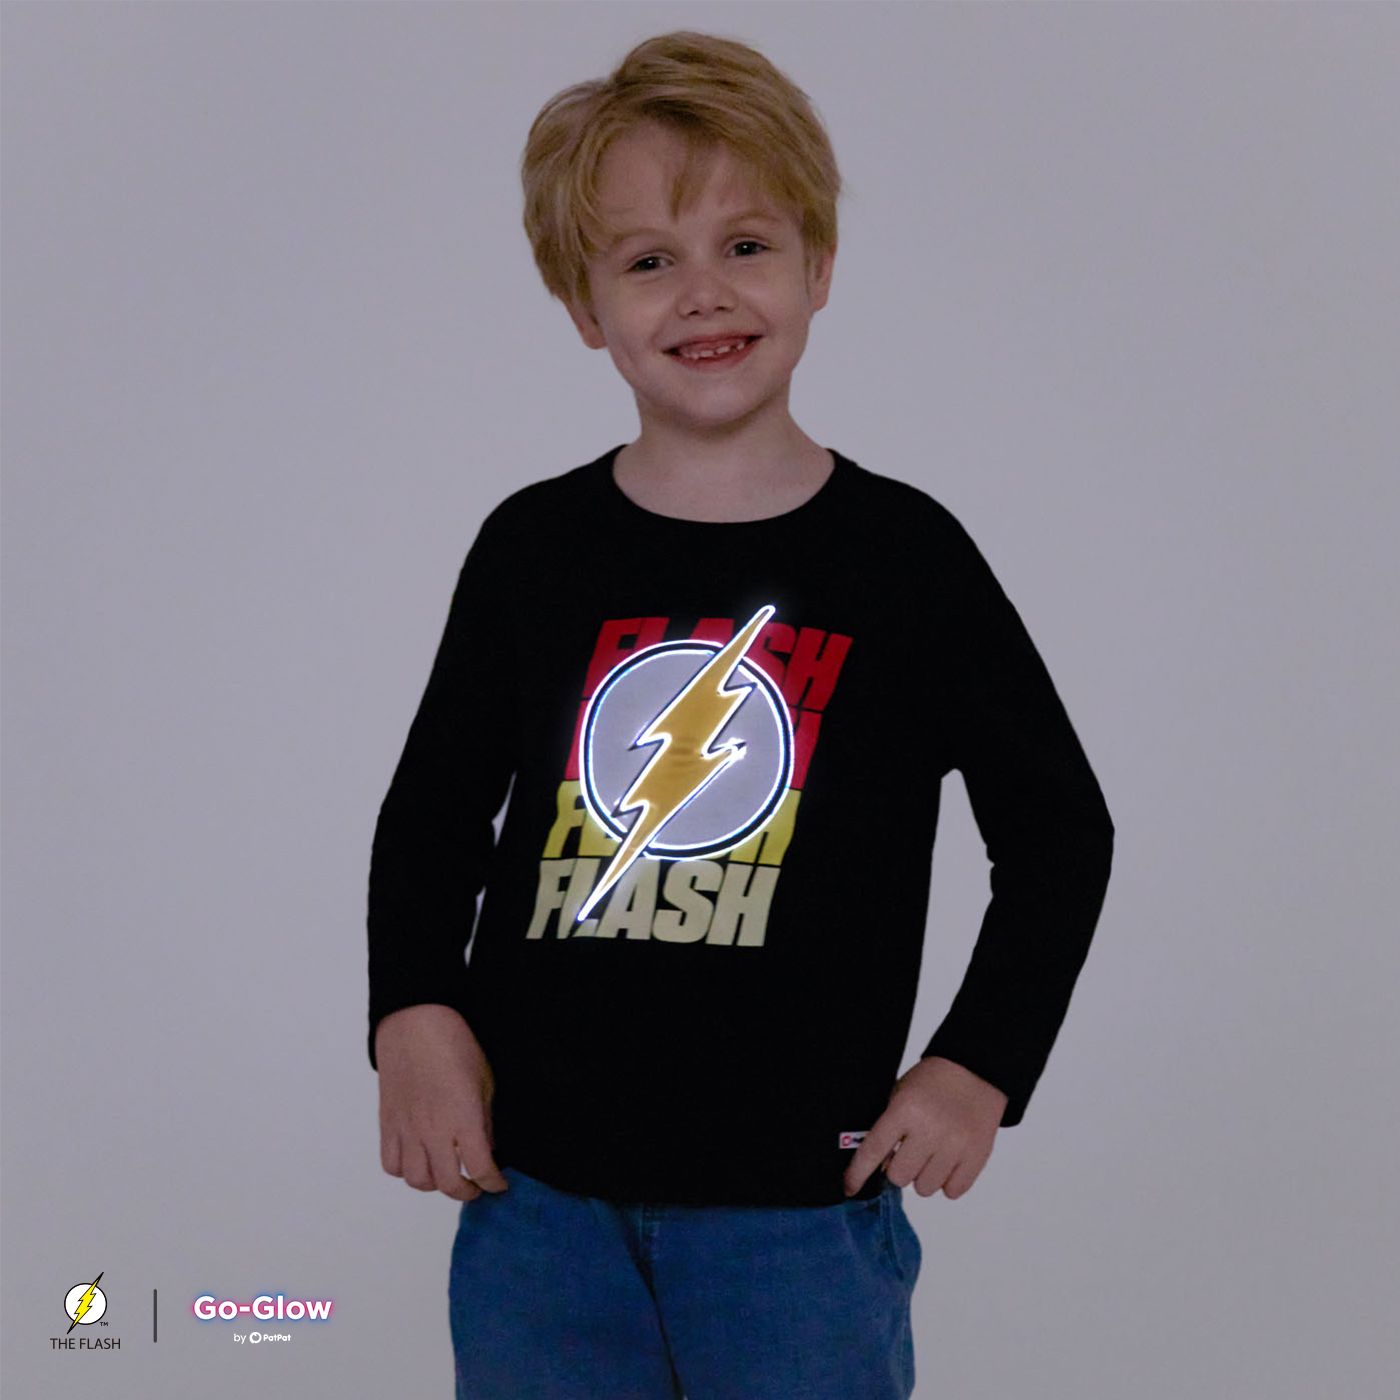 Go-Glow THE FLASH Illuminating Black Sweatshirt with Light Up The Flash Pattern Including Controller